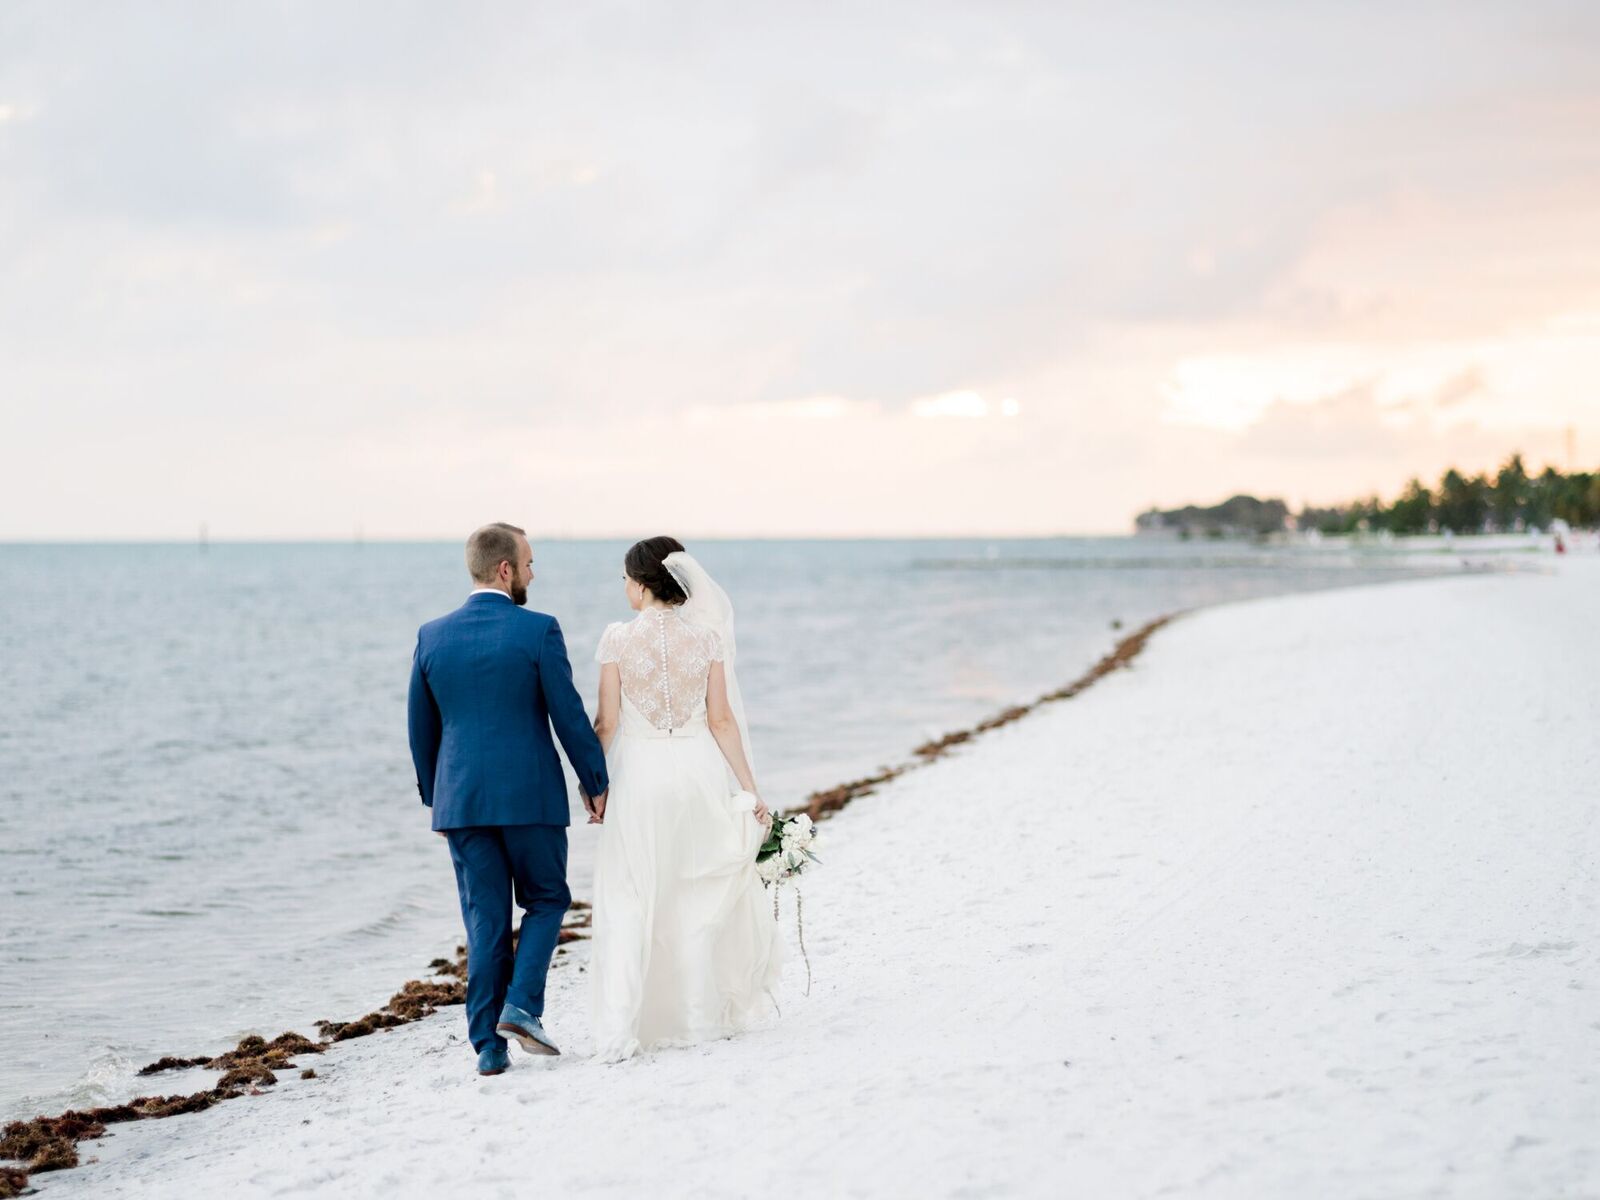 Top 5 Reasons to Have Your Destination Wedding in the Florida Keys